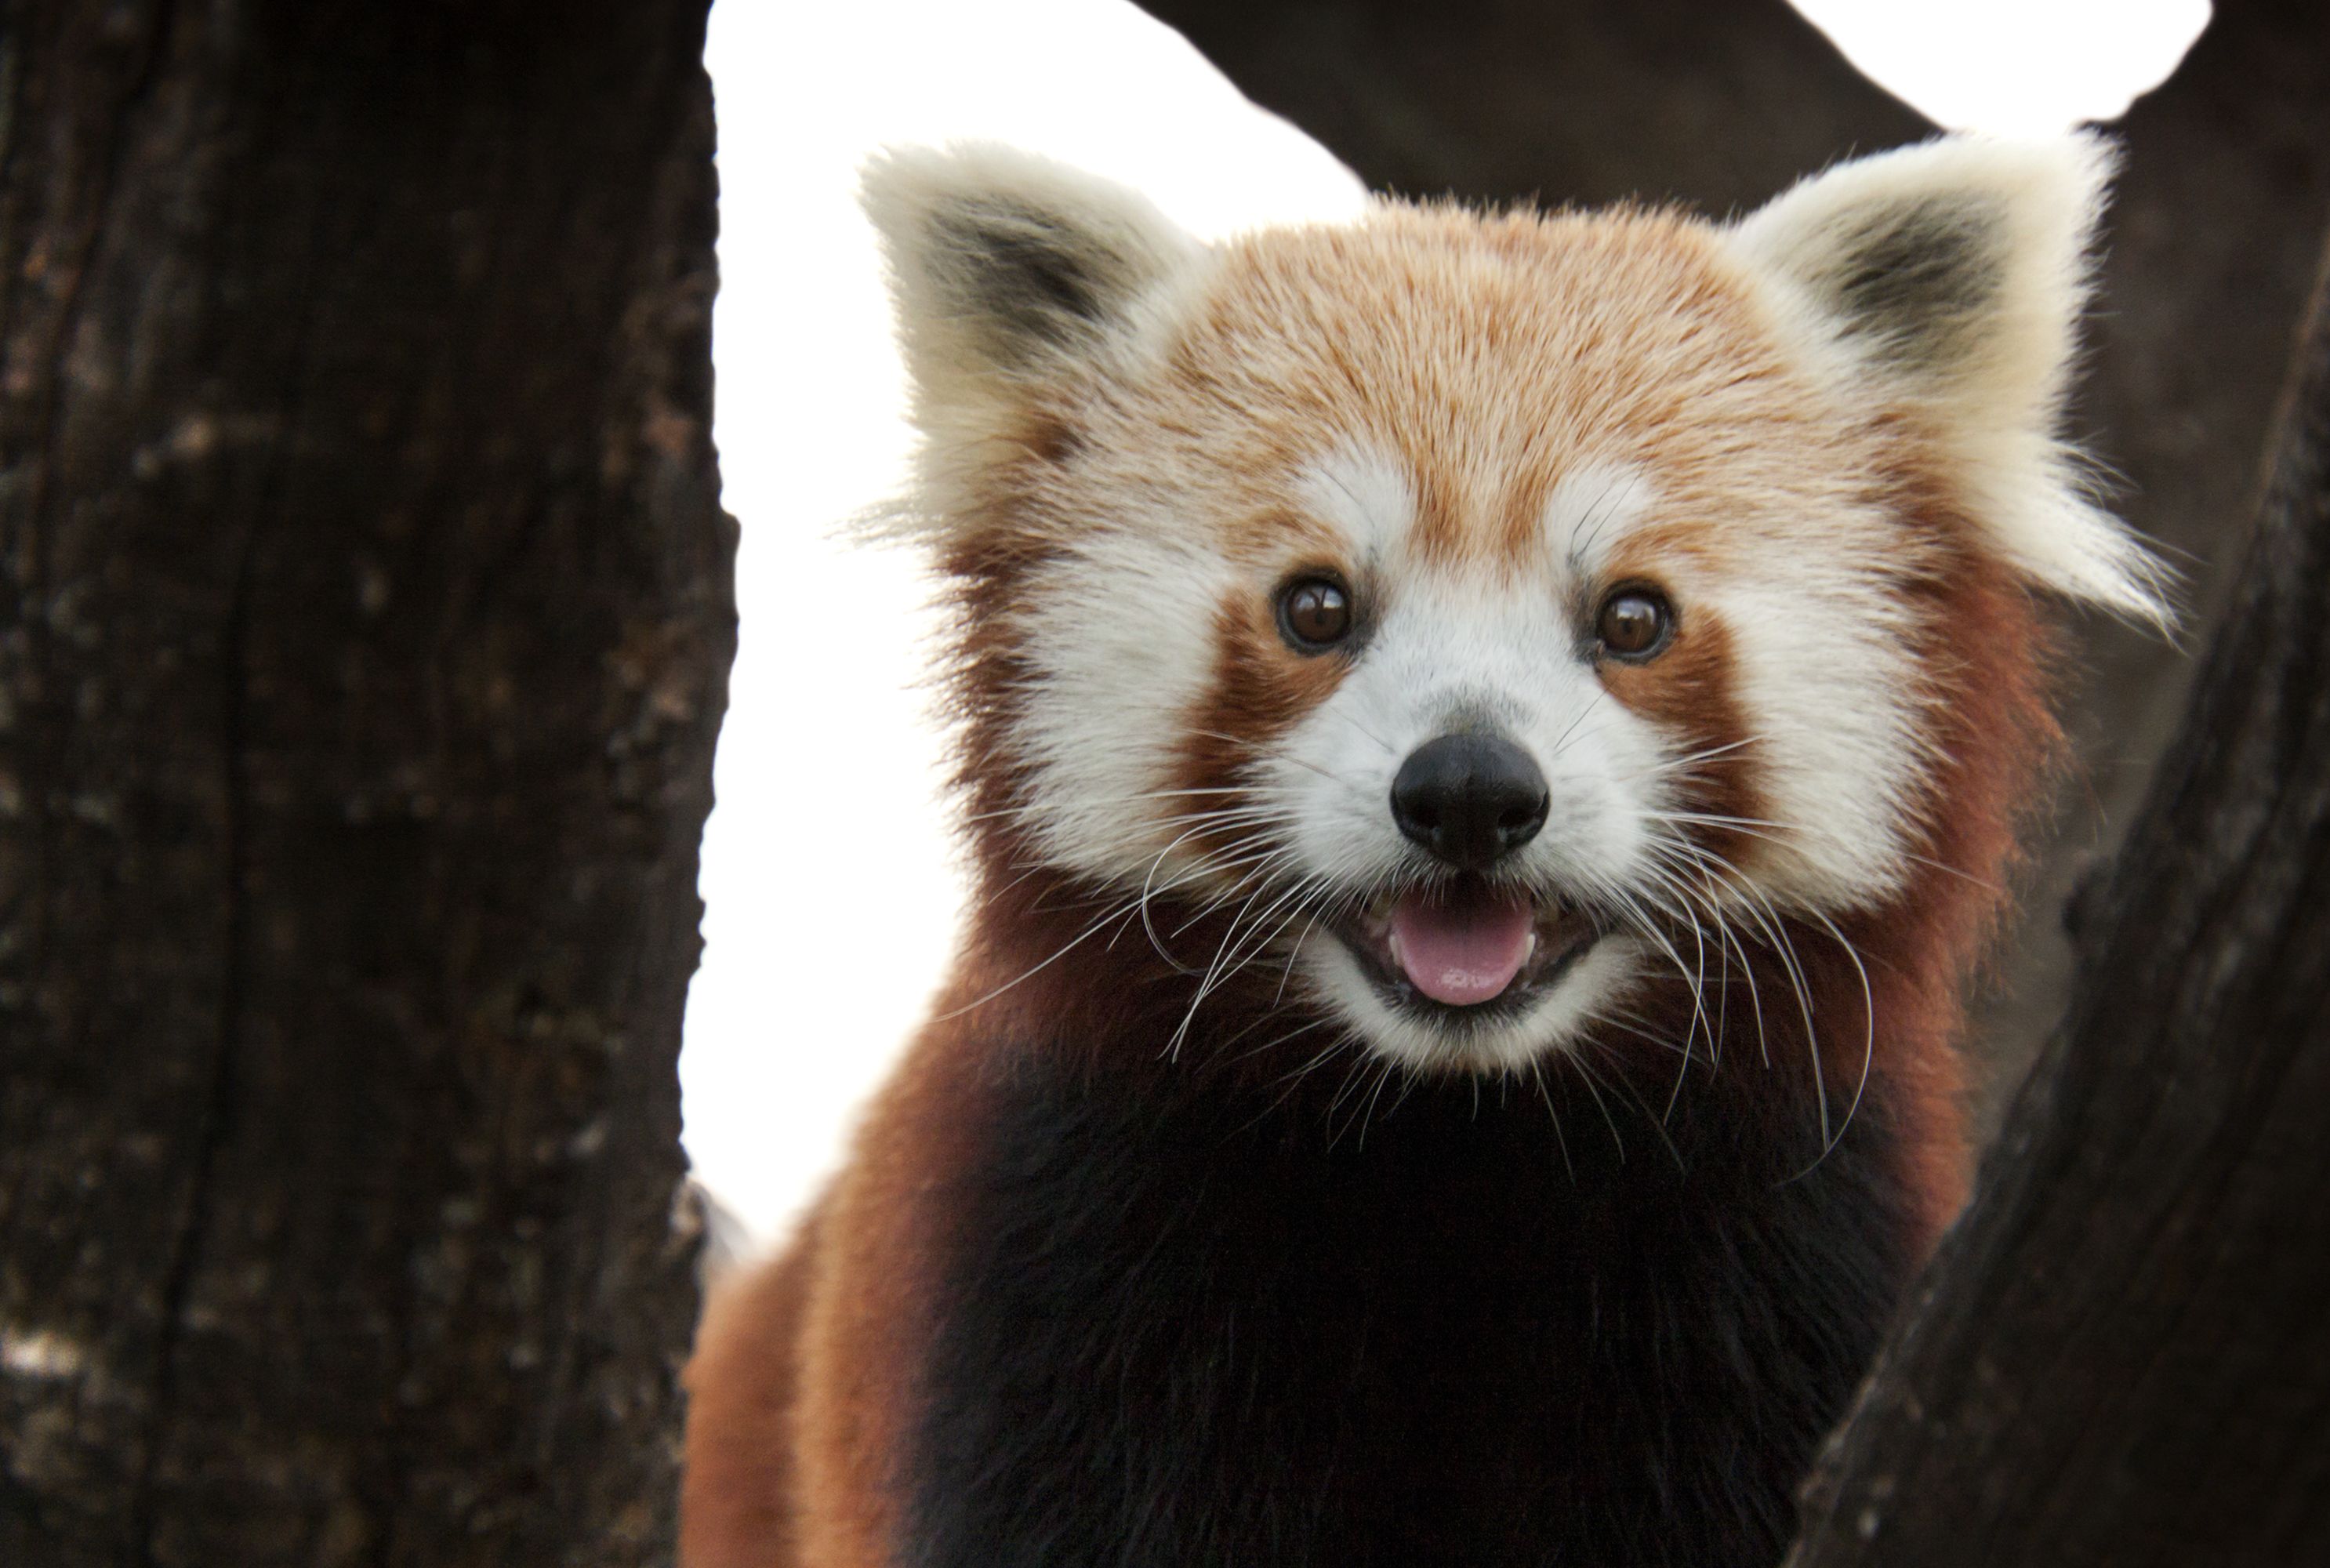 12 Furry Facts About Red Pandas Mental Floss